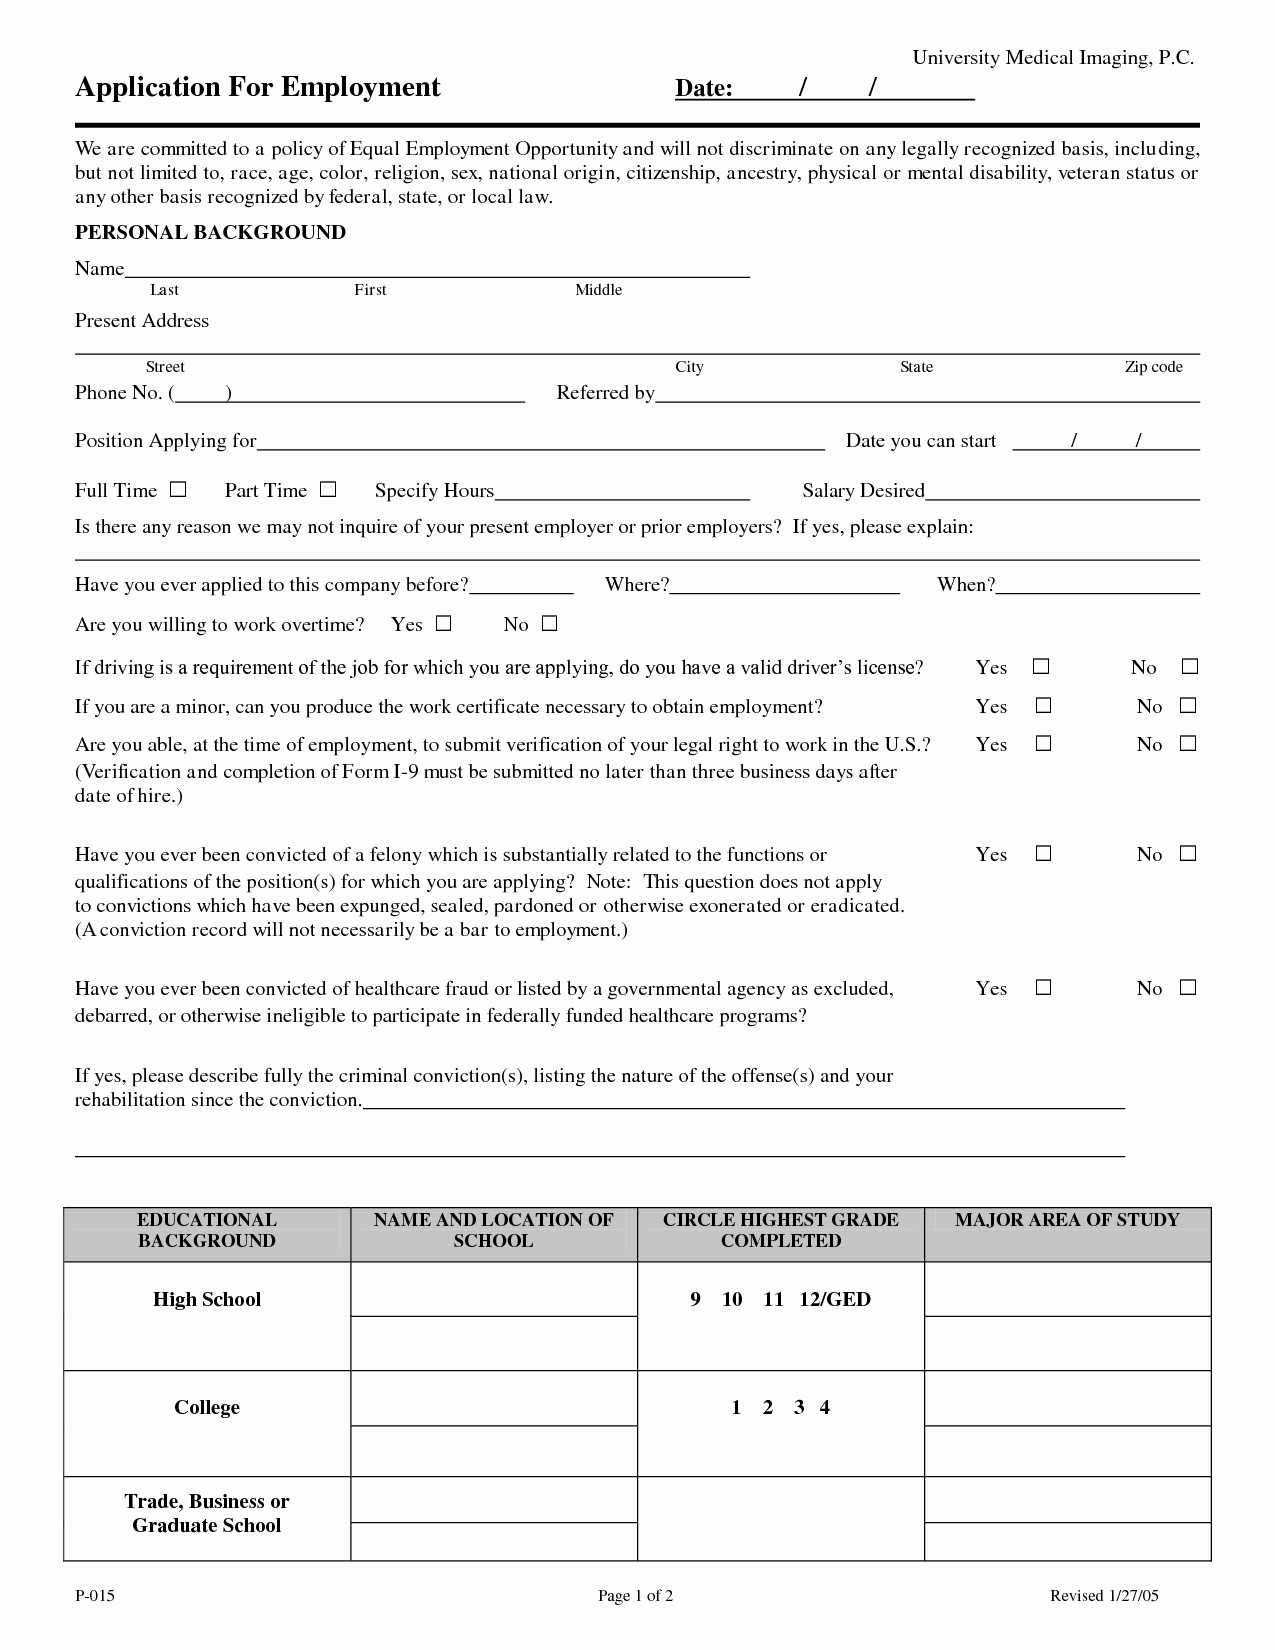 General Application for Employment Template Beautiful Best S Of Employment General Template Job Application